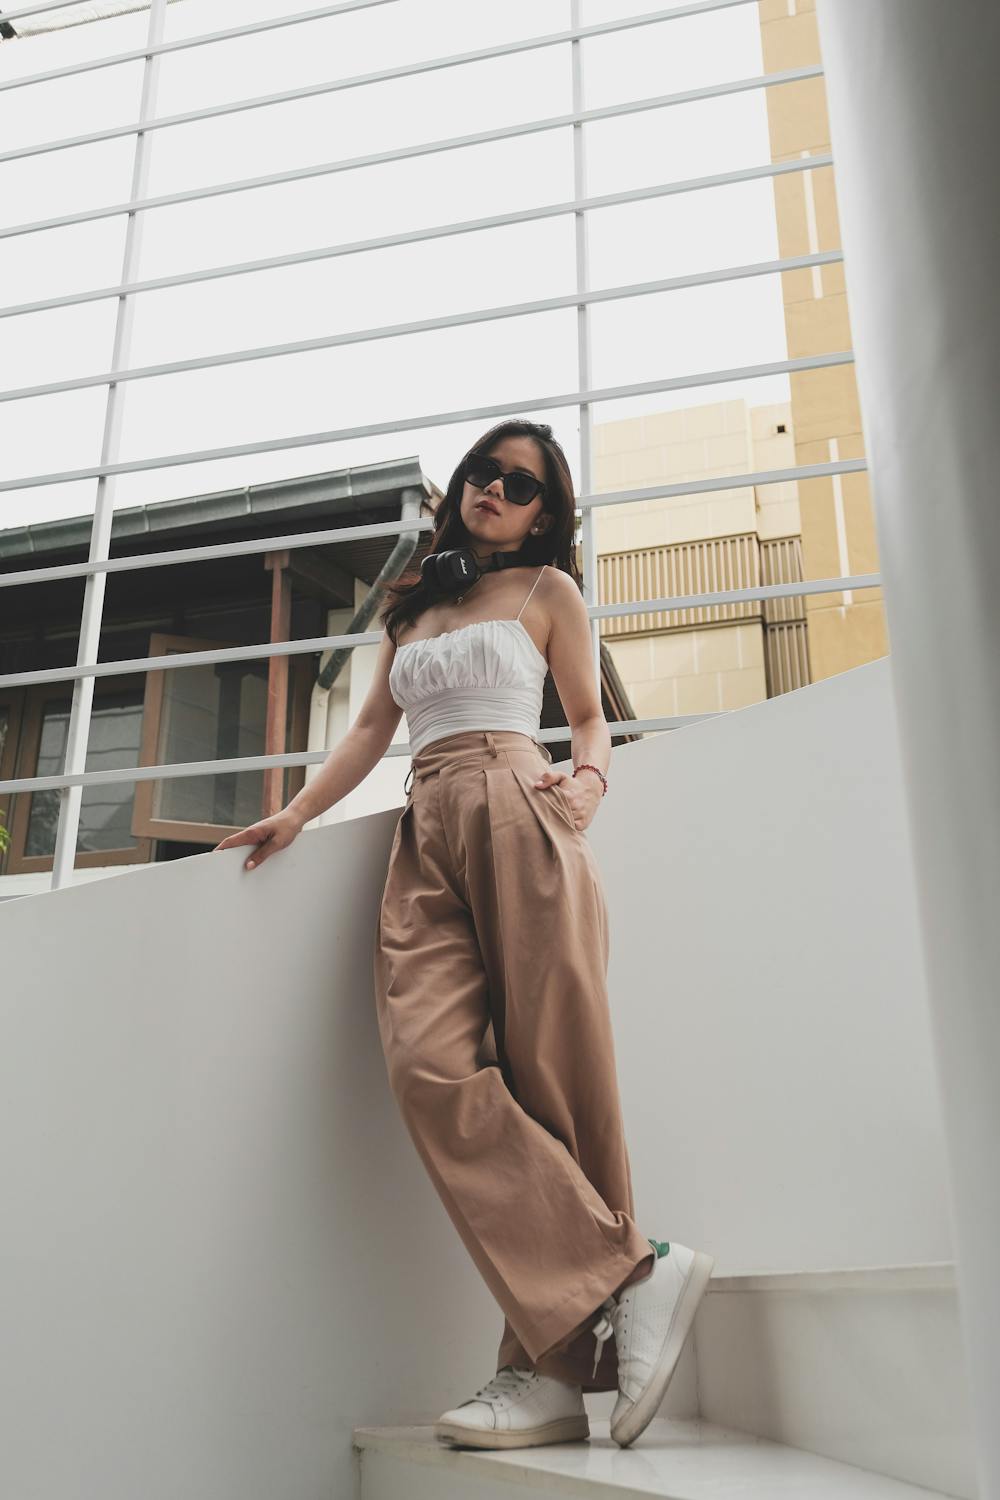 Hourglass figure trousers - neutral colored trousers